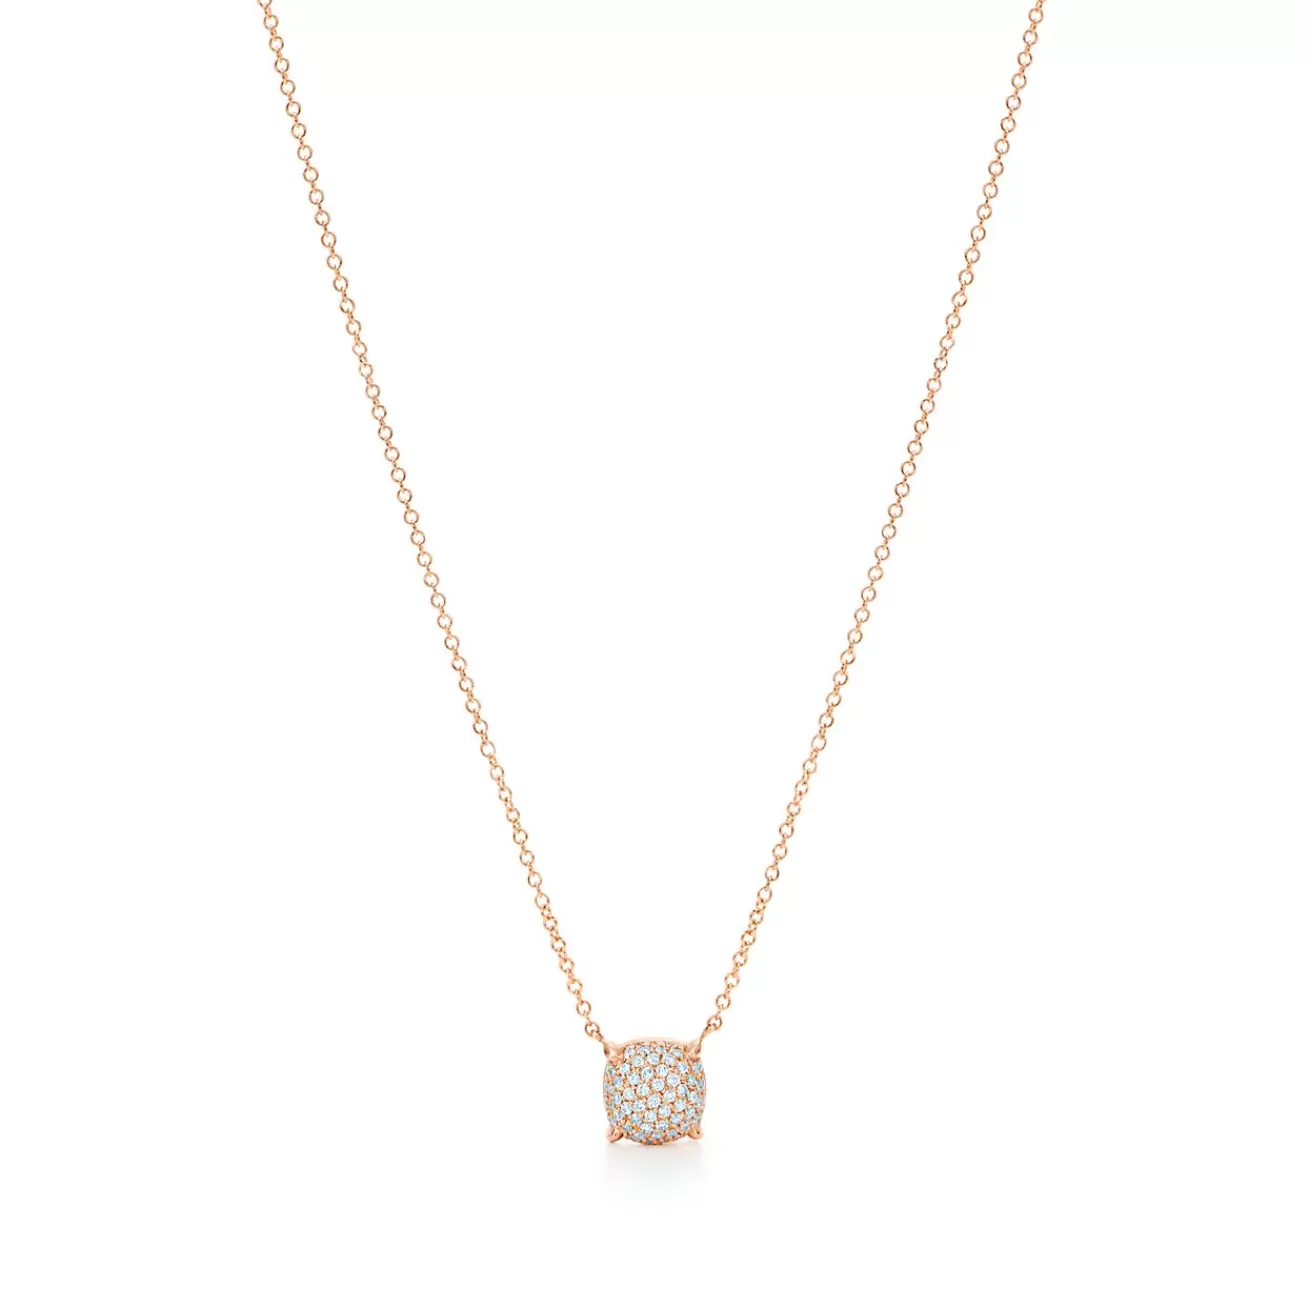 Tiffany & Co. Paloma's Sugar Stacks pendant in 18k rose gold with diamonds. | ^ Necklaces & Pendants | Rose Gold Jewelry